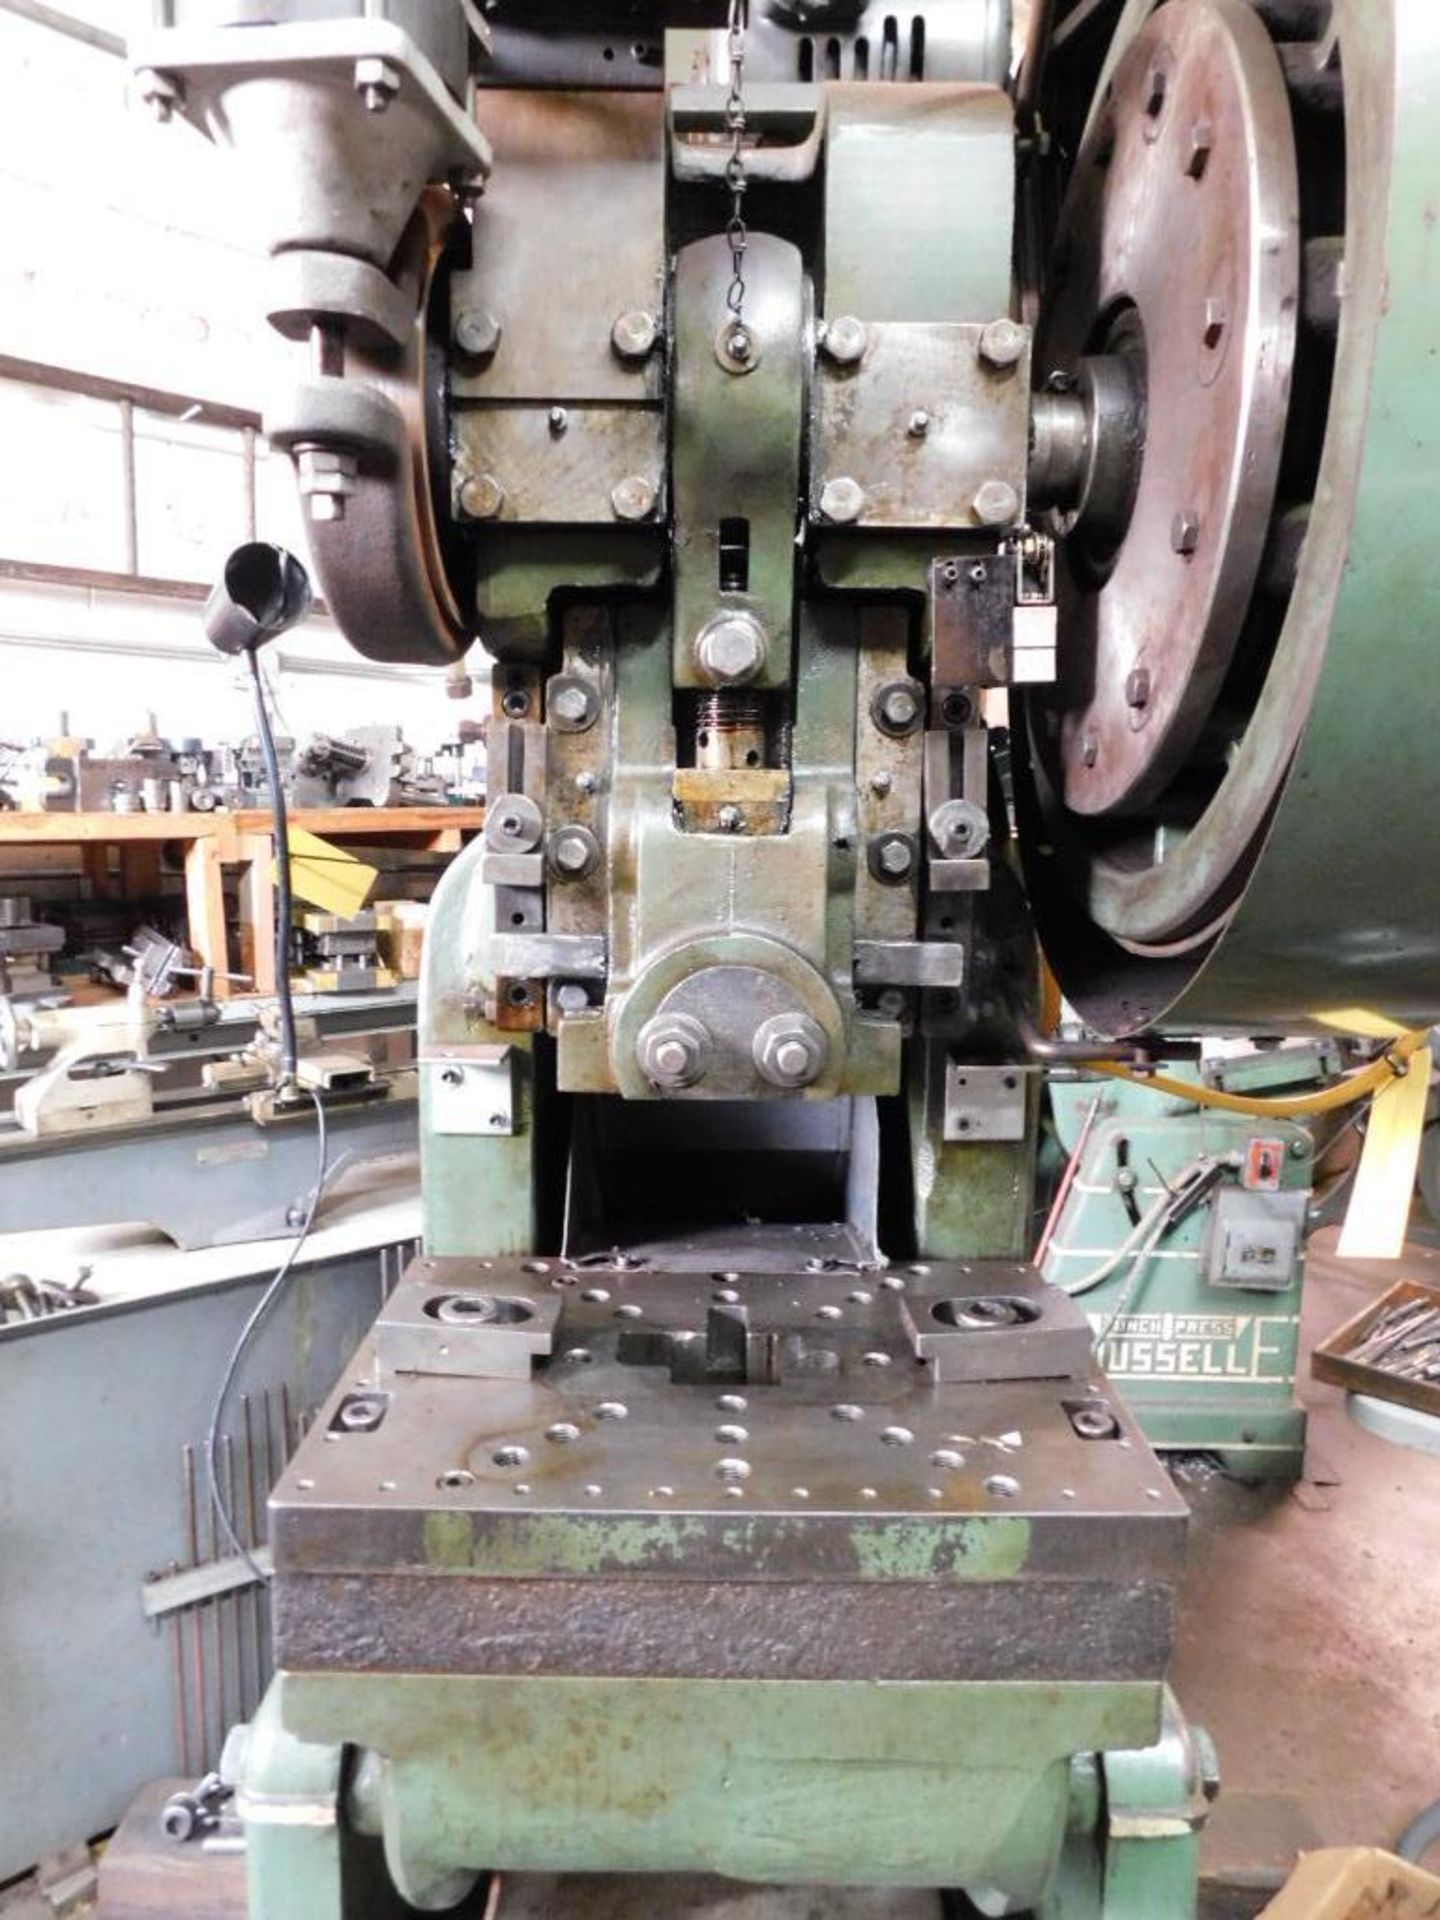 Rousselle No. 3 25-Ton OBI Air Clutch Punch Press. 2" Stroke, 7.75" Shut Height, 20"x14" Bolster Pla - Image 5 of 11